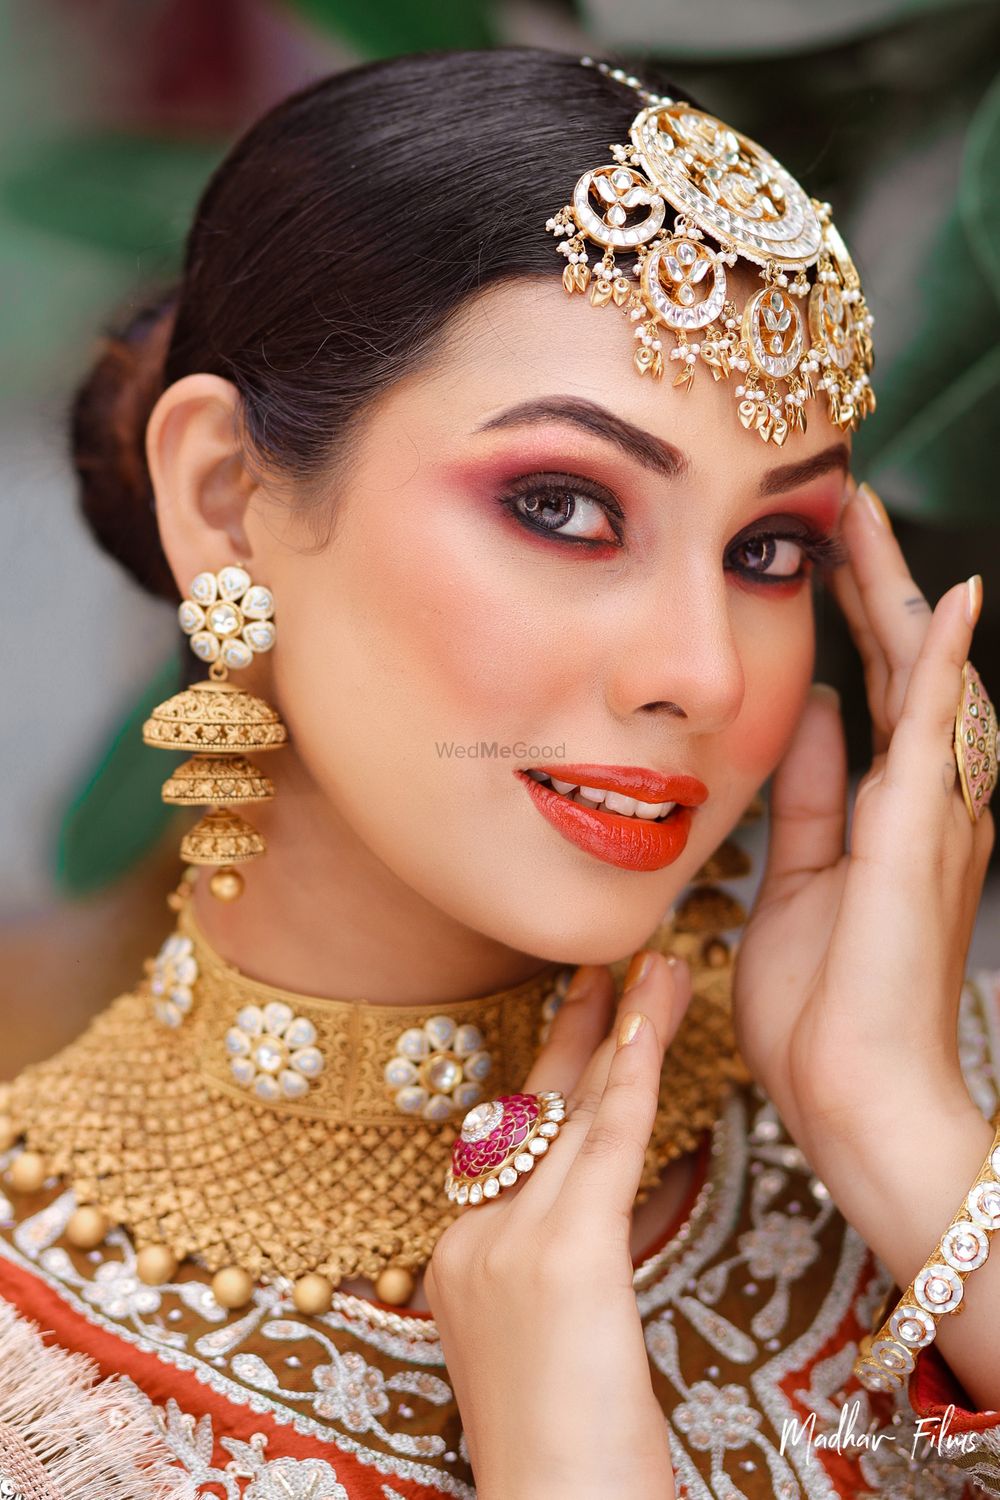 Photo From @kamnasharmofficial Bridal makeupartist l freelancermakeupartist For enquiries - +916280413161,+919915777213 - By Kamna Sharma